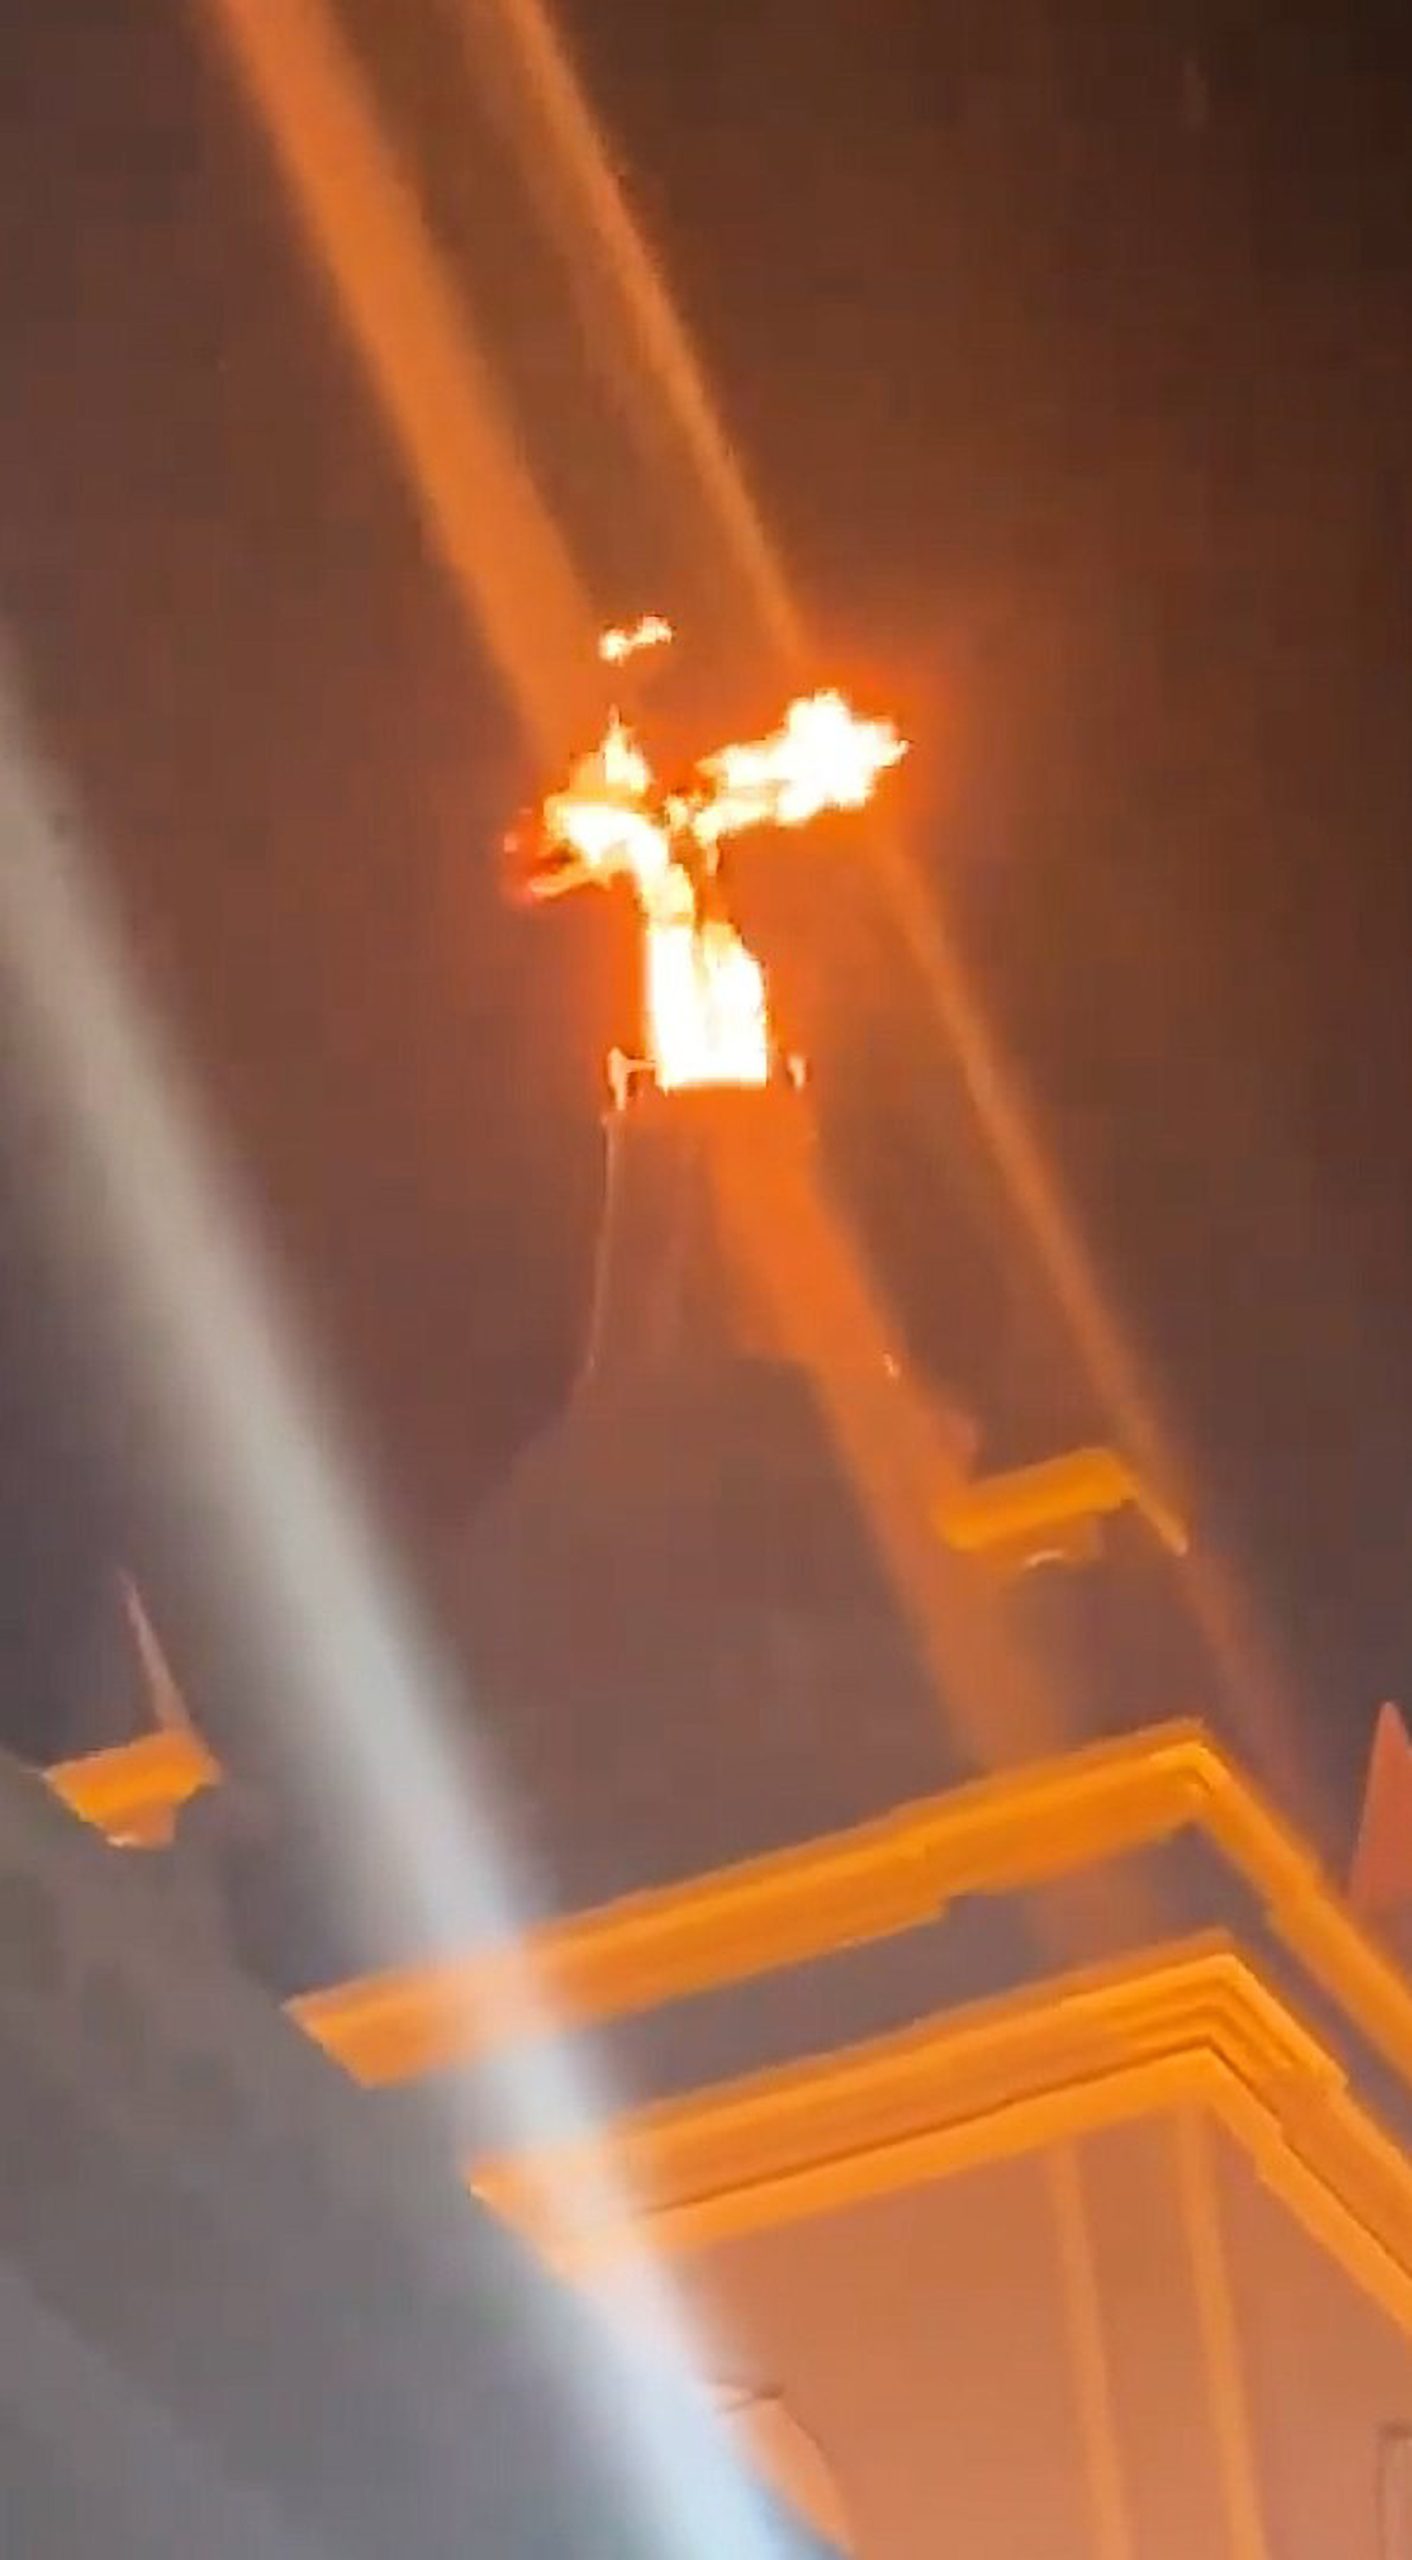 Read more about the article Cross Goes Up In Flames Atop Church While Faithful Attend Mass During Heavy Rain